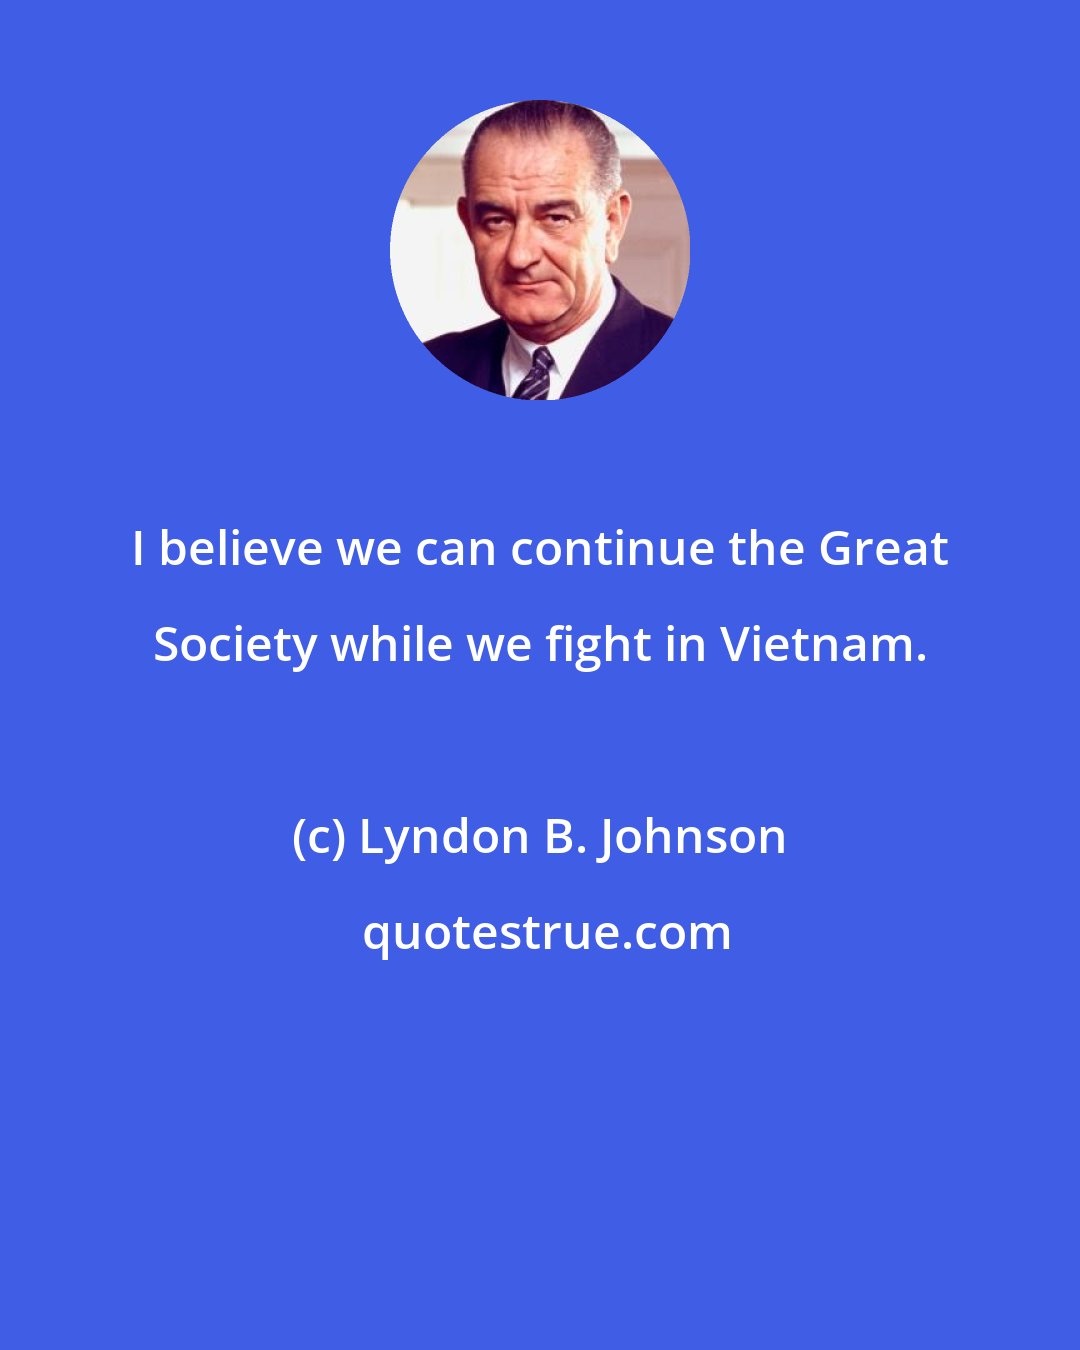 Lyndon B. Johnson: I believe we can continue the Great Society while we fight in Vietnam.